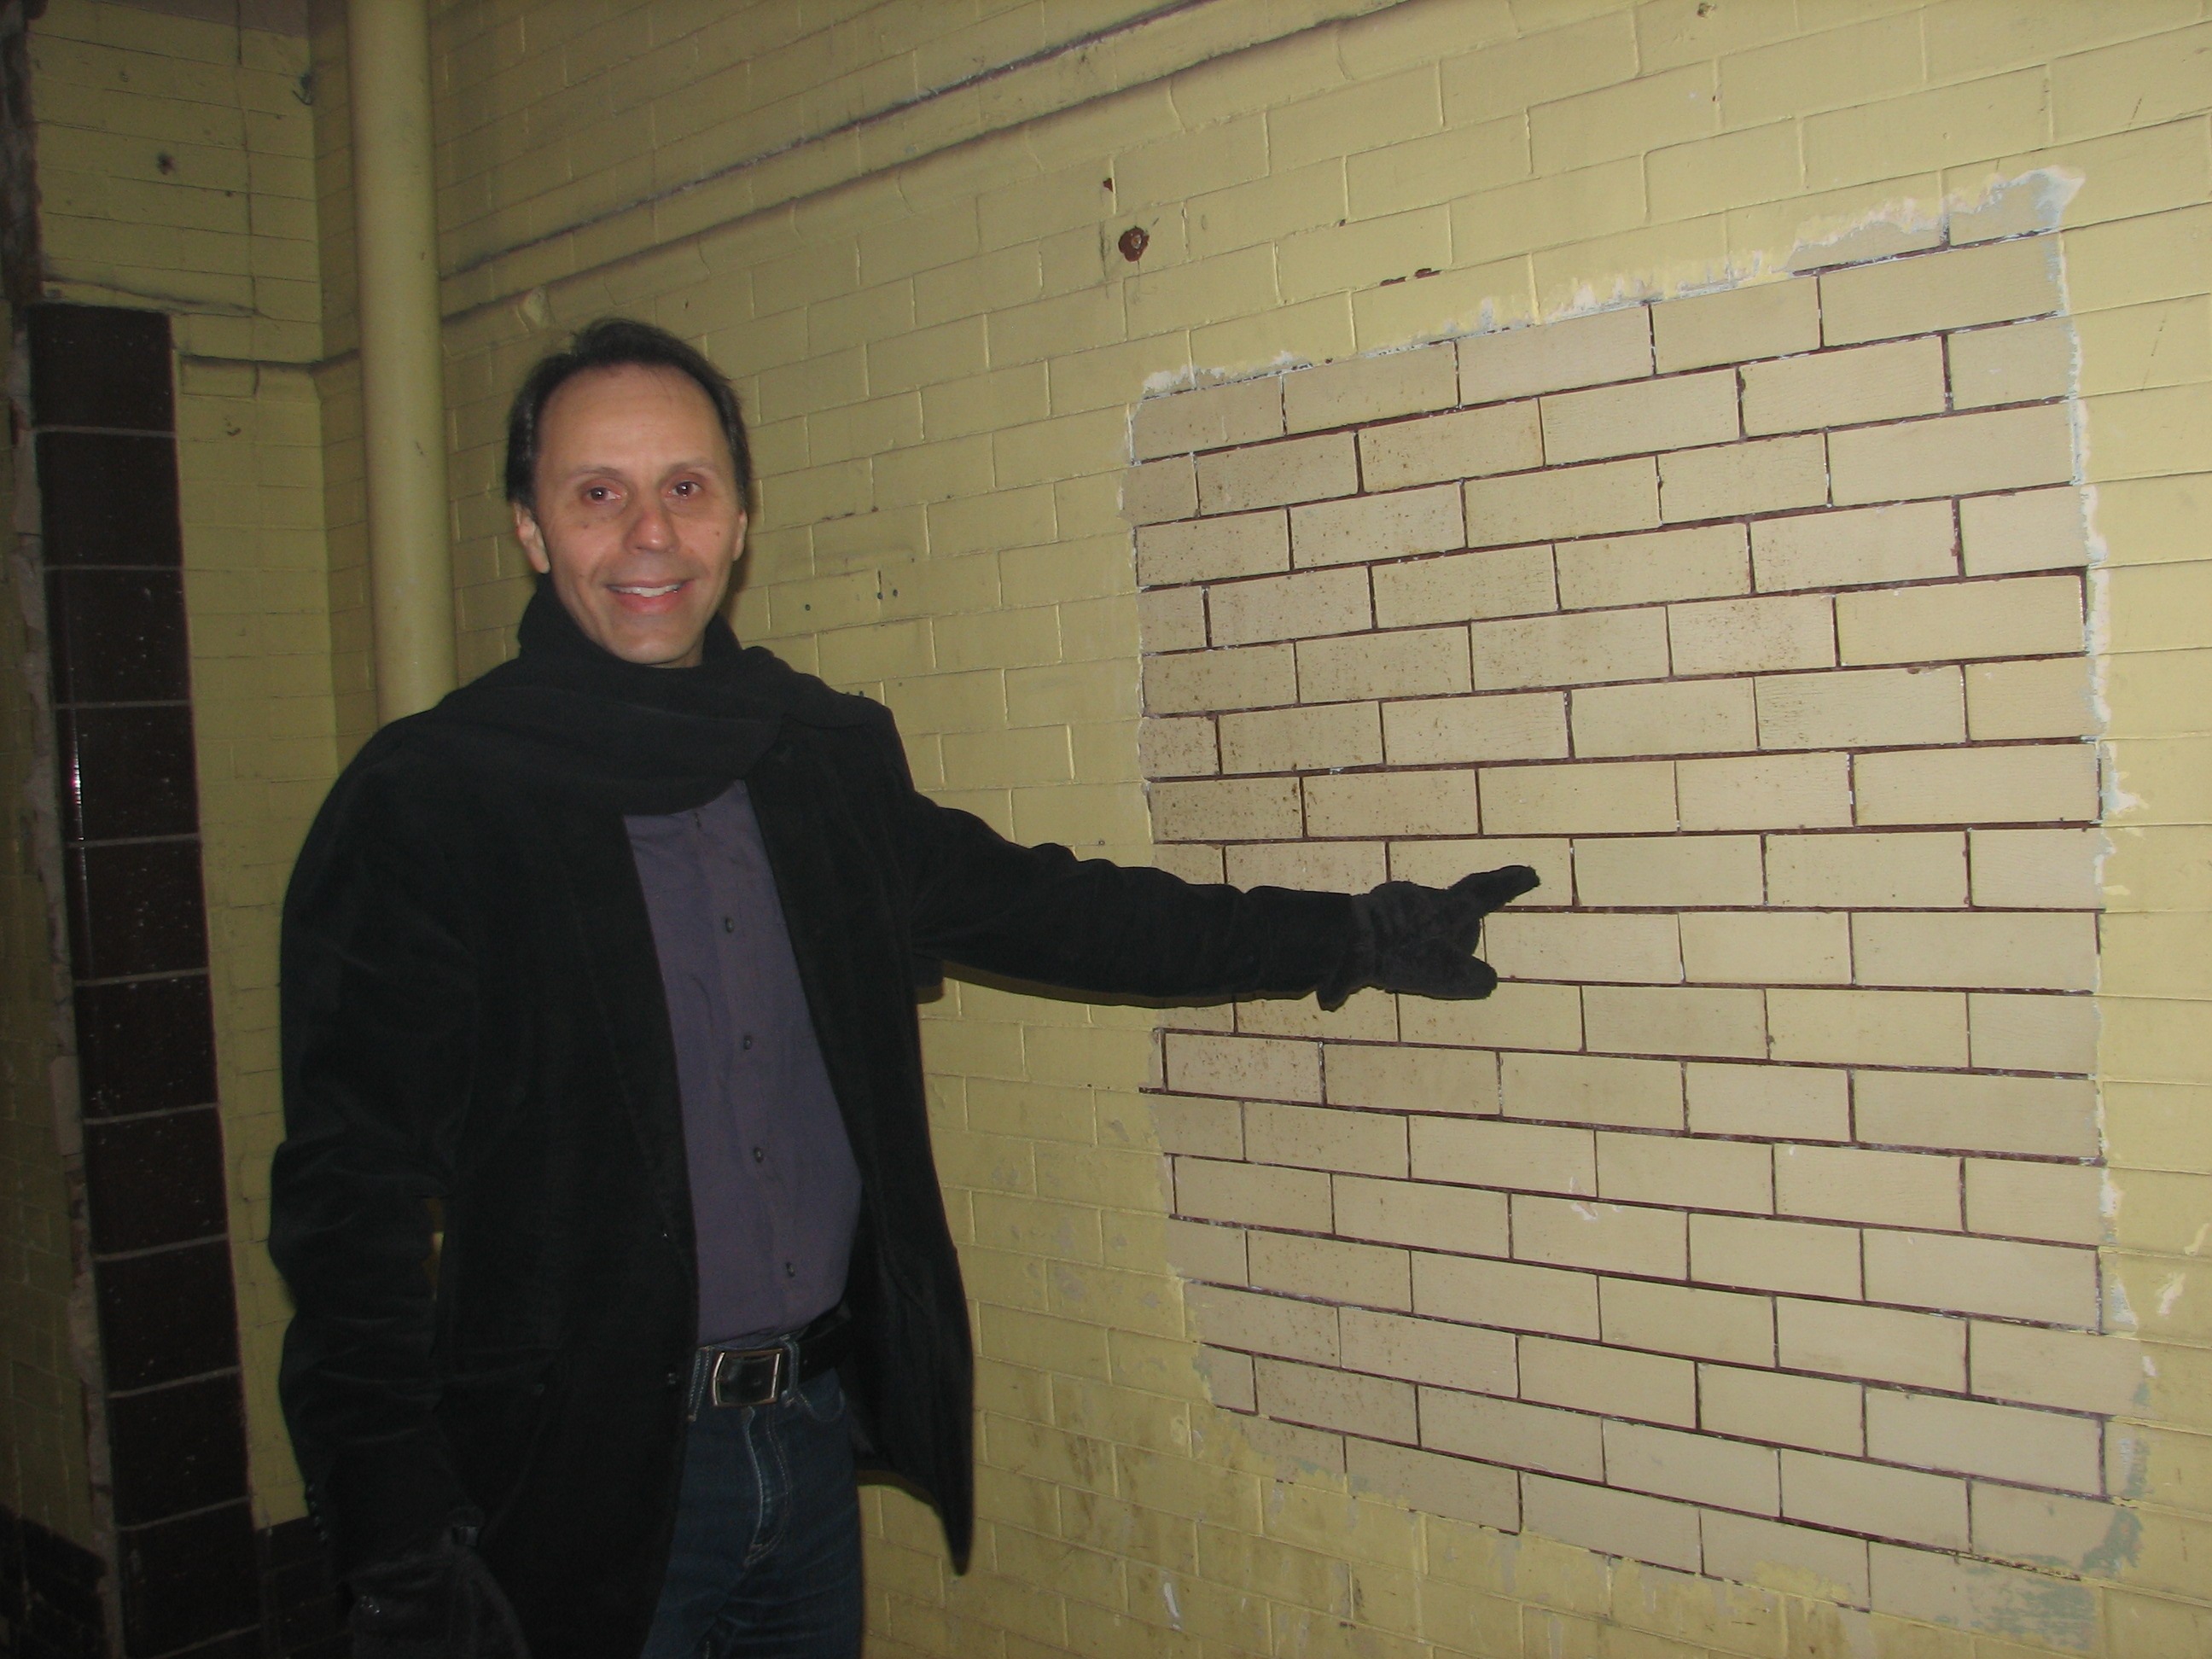 Philly Fringe President Nick Stuccio points out what lies on the walls of the building beneath a layer of paint: Original glazed brick. The construction dust makes it hard to see the color. They are a pale yellow.